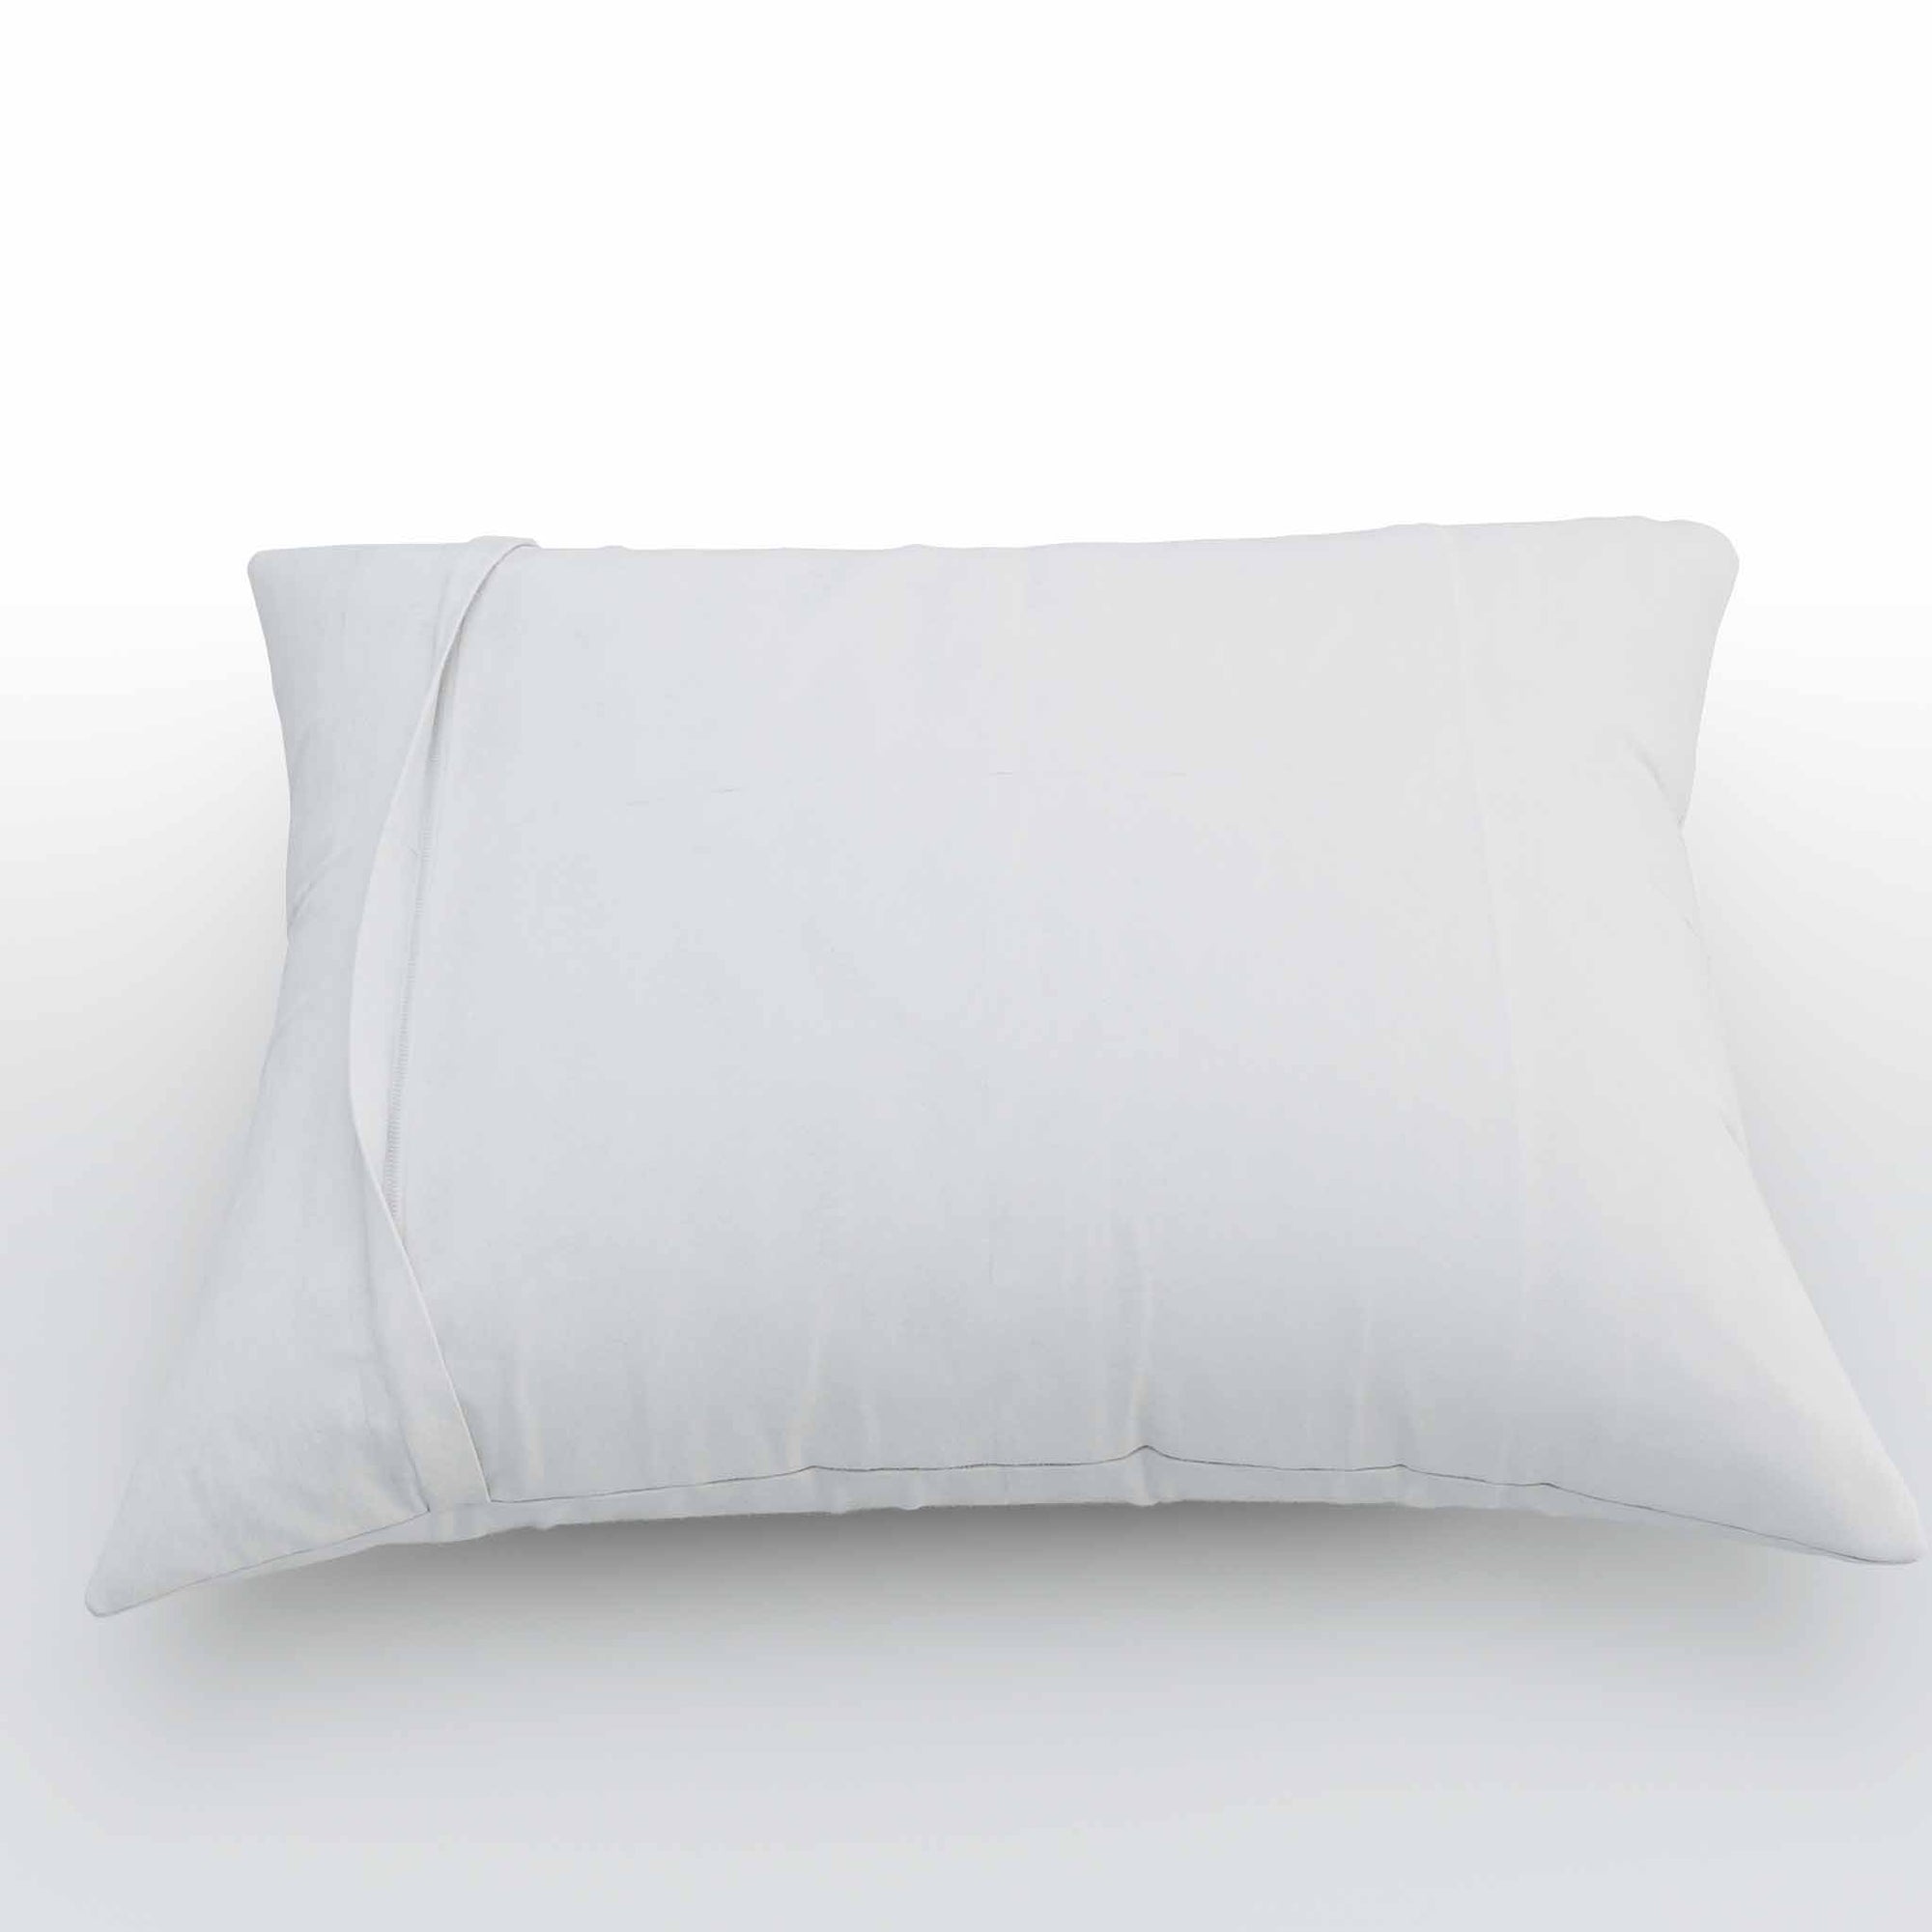 2 Pack) Anti-Dust Mite and Allergen Proof Pillowcases